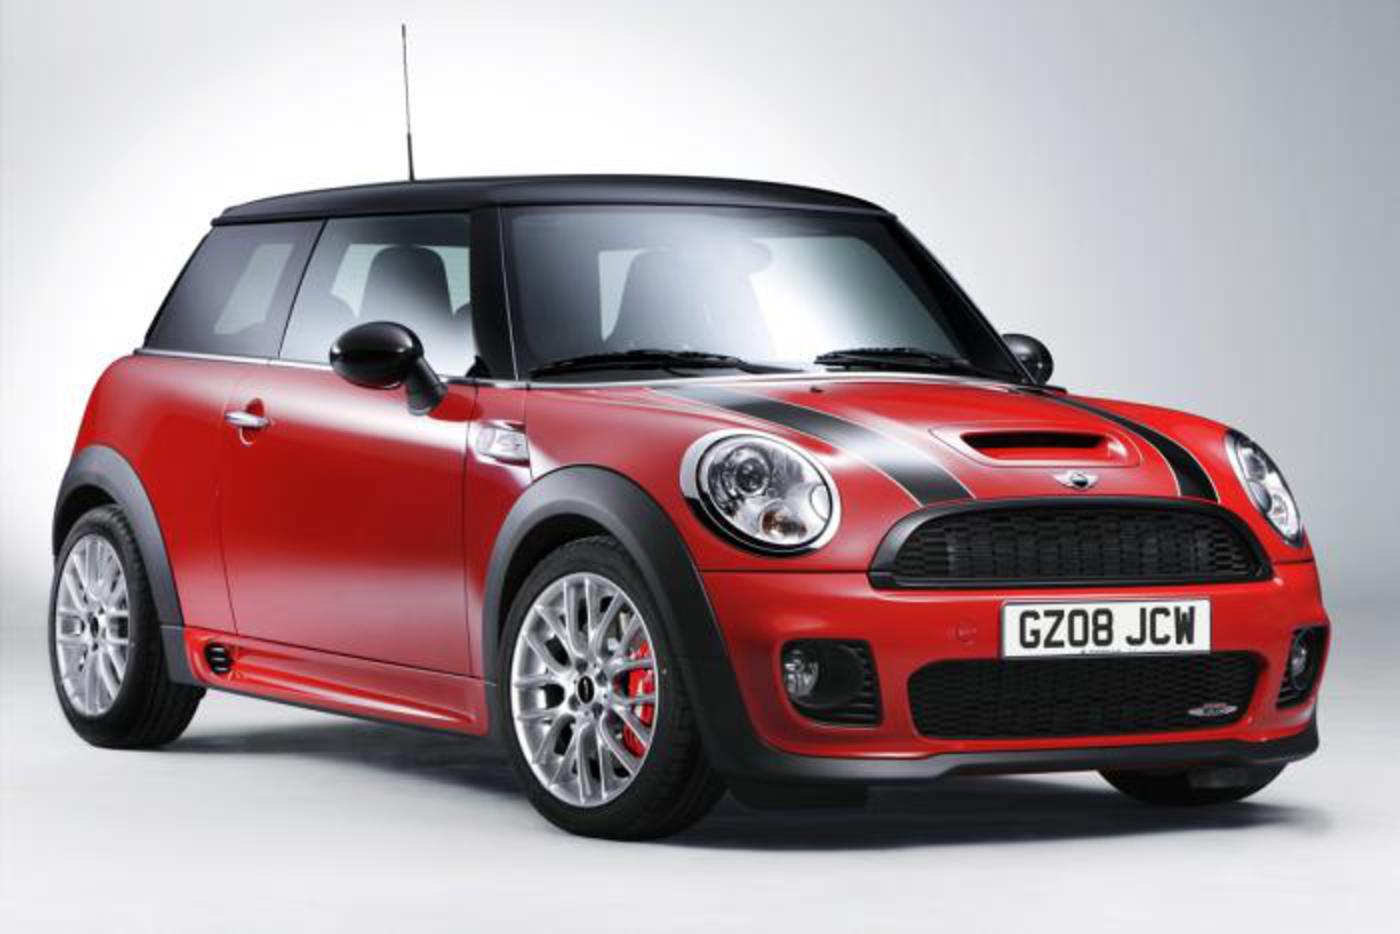 MINI Cooper S Works - Pictures | Auto Express